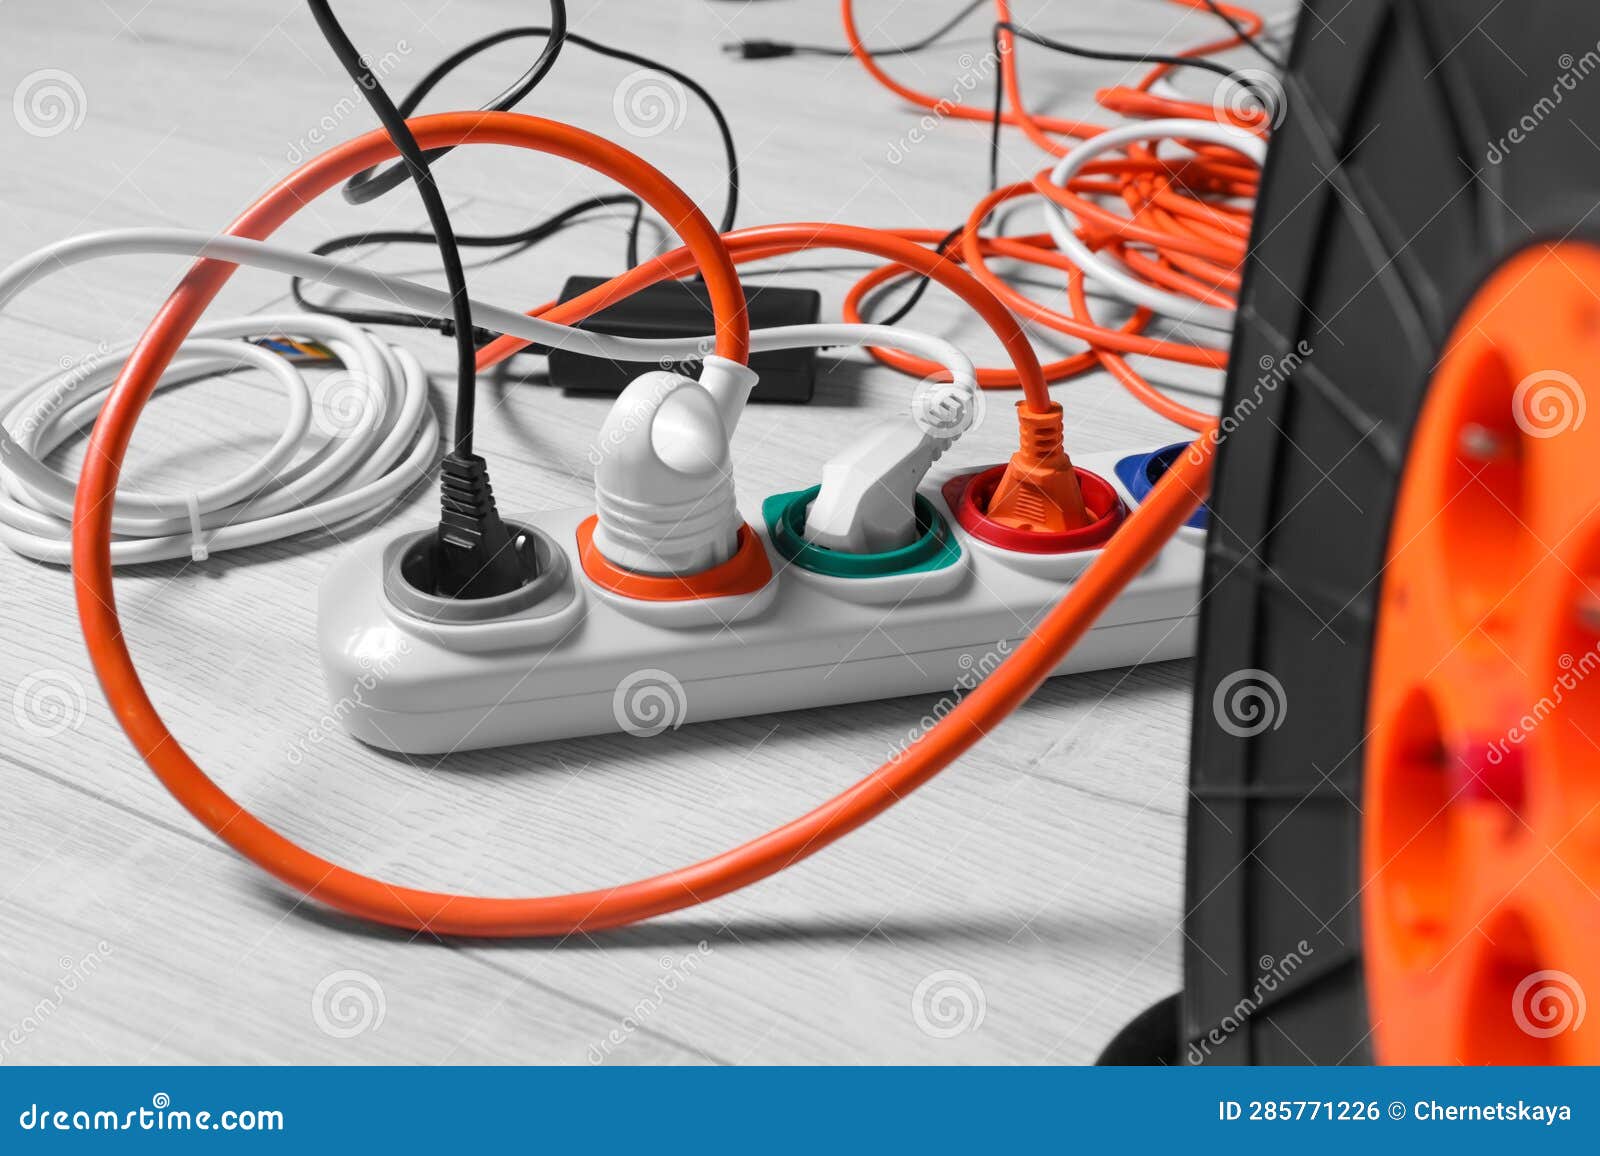 Extension Cord Reel Plugged into Power Strip Indoors, Closeup ...